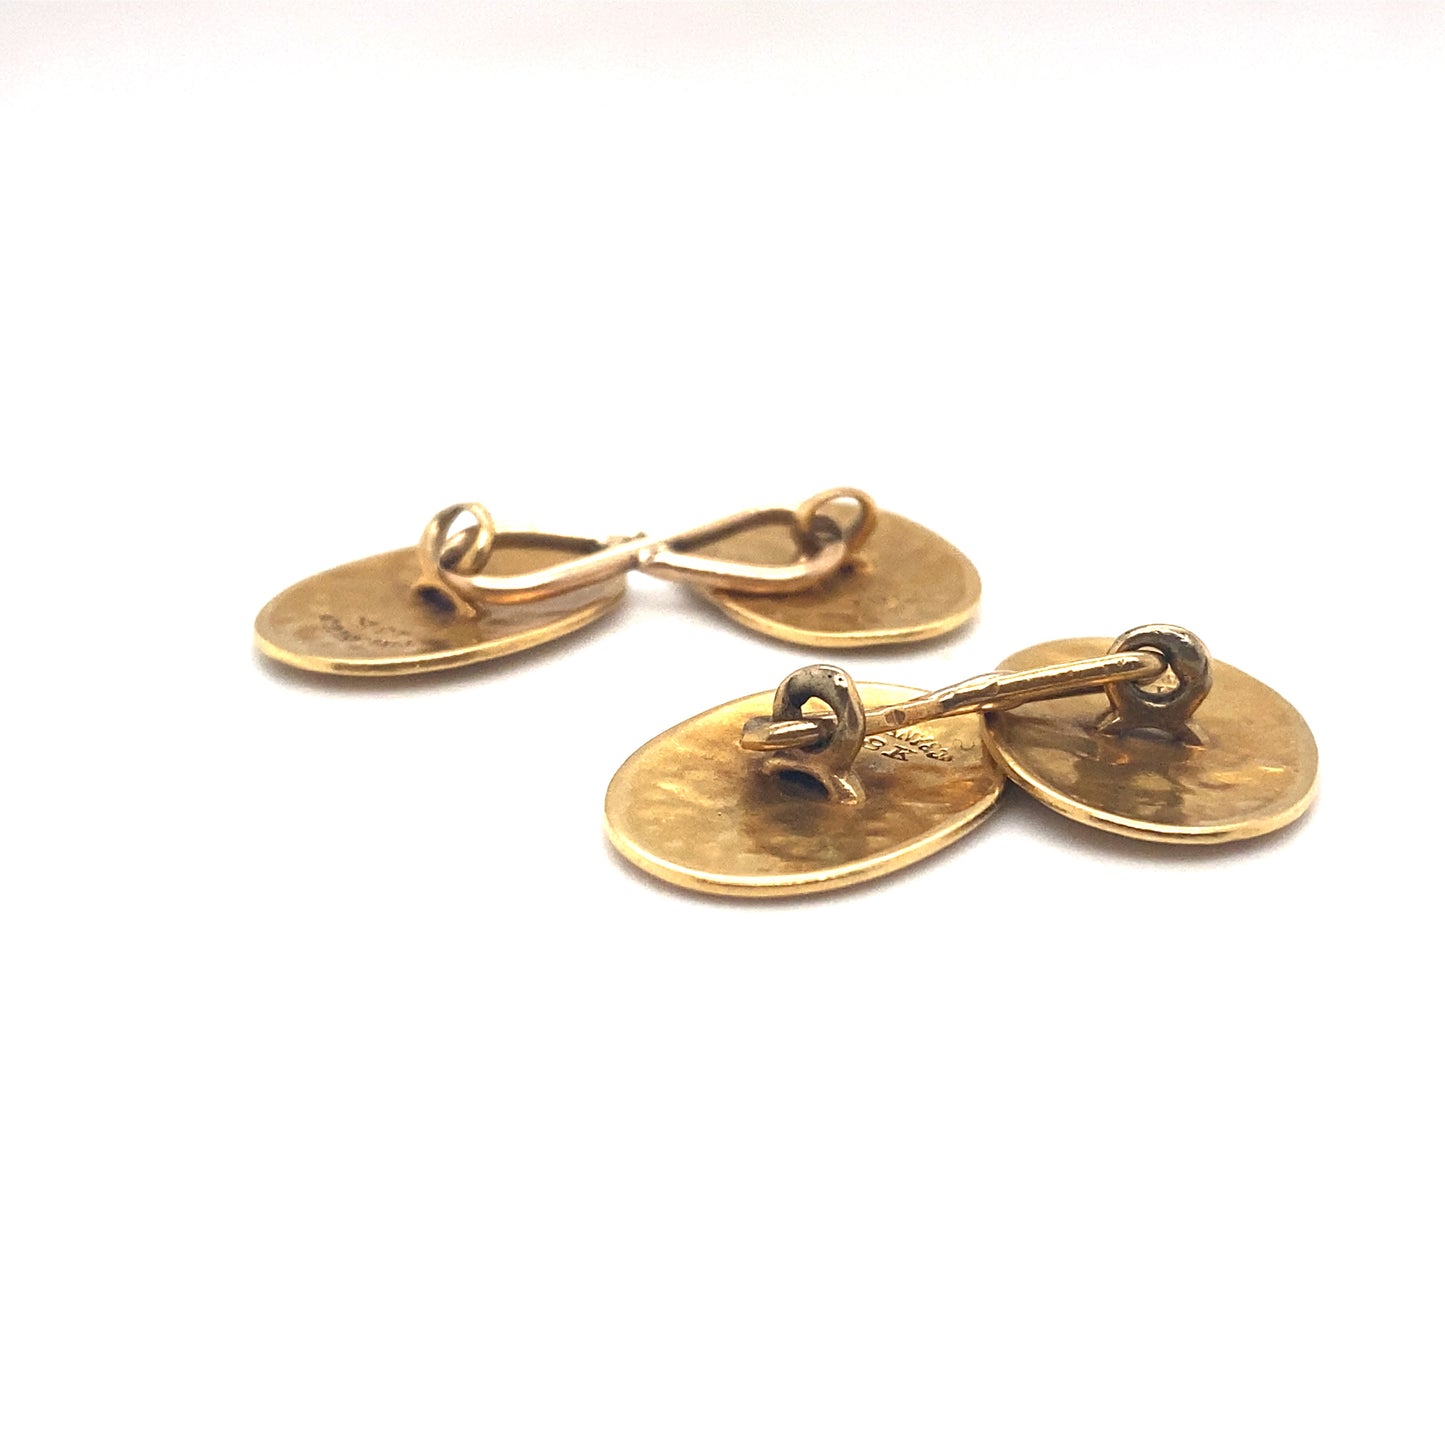 Circa 1890s Tiffany & Co. Etched Cufflinks in 18K Gold